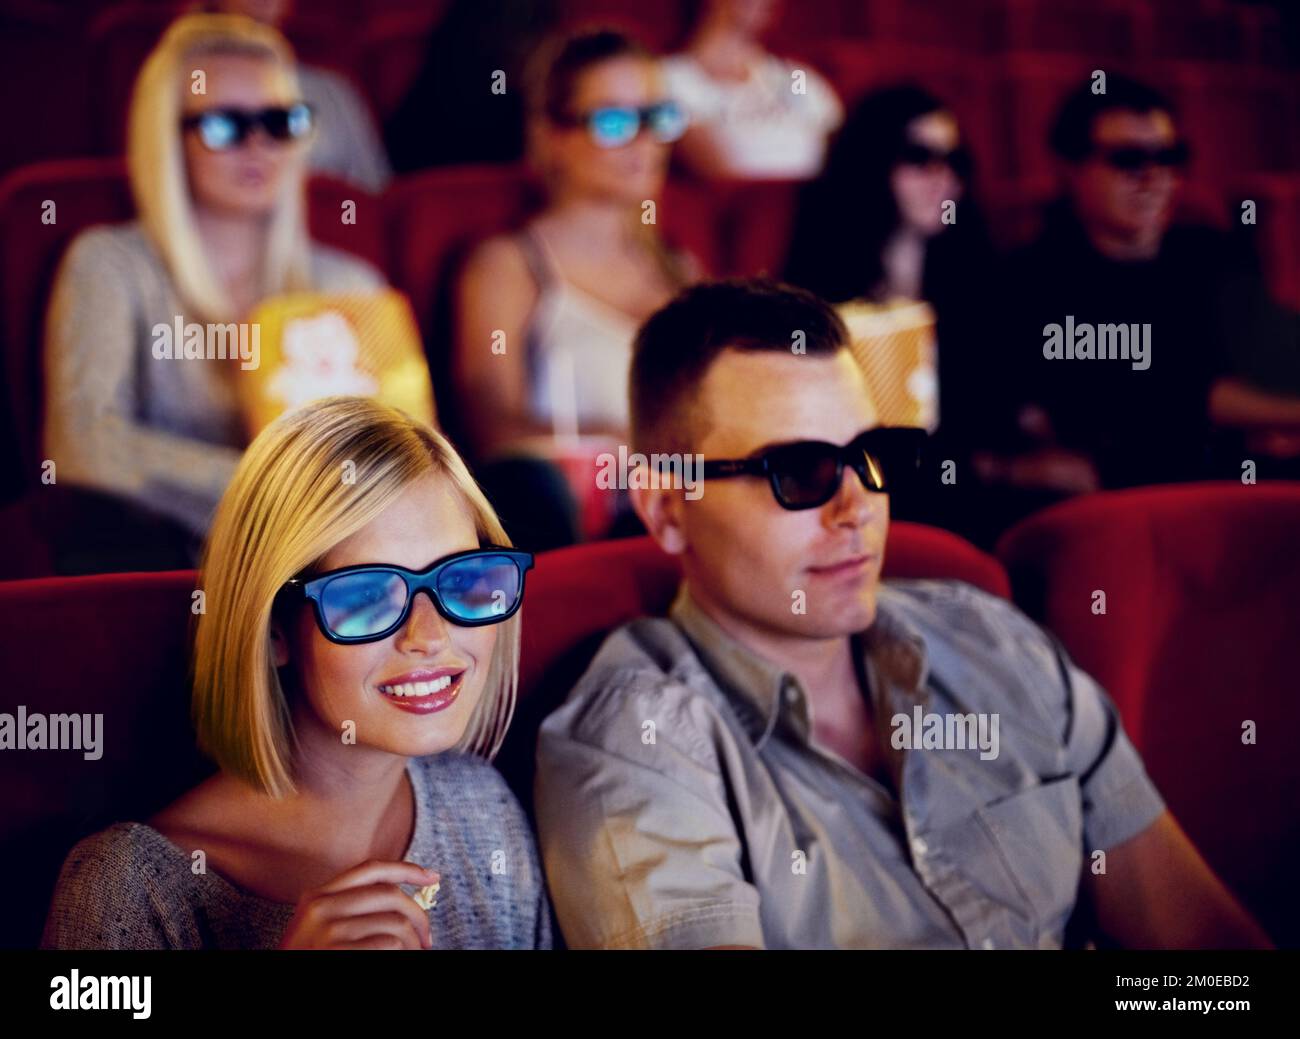 Something we like to share. A couple sitting and eating popcorn while watching a 3D movie together in a cinema. Stock Photo